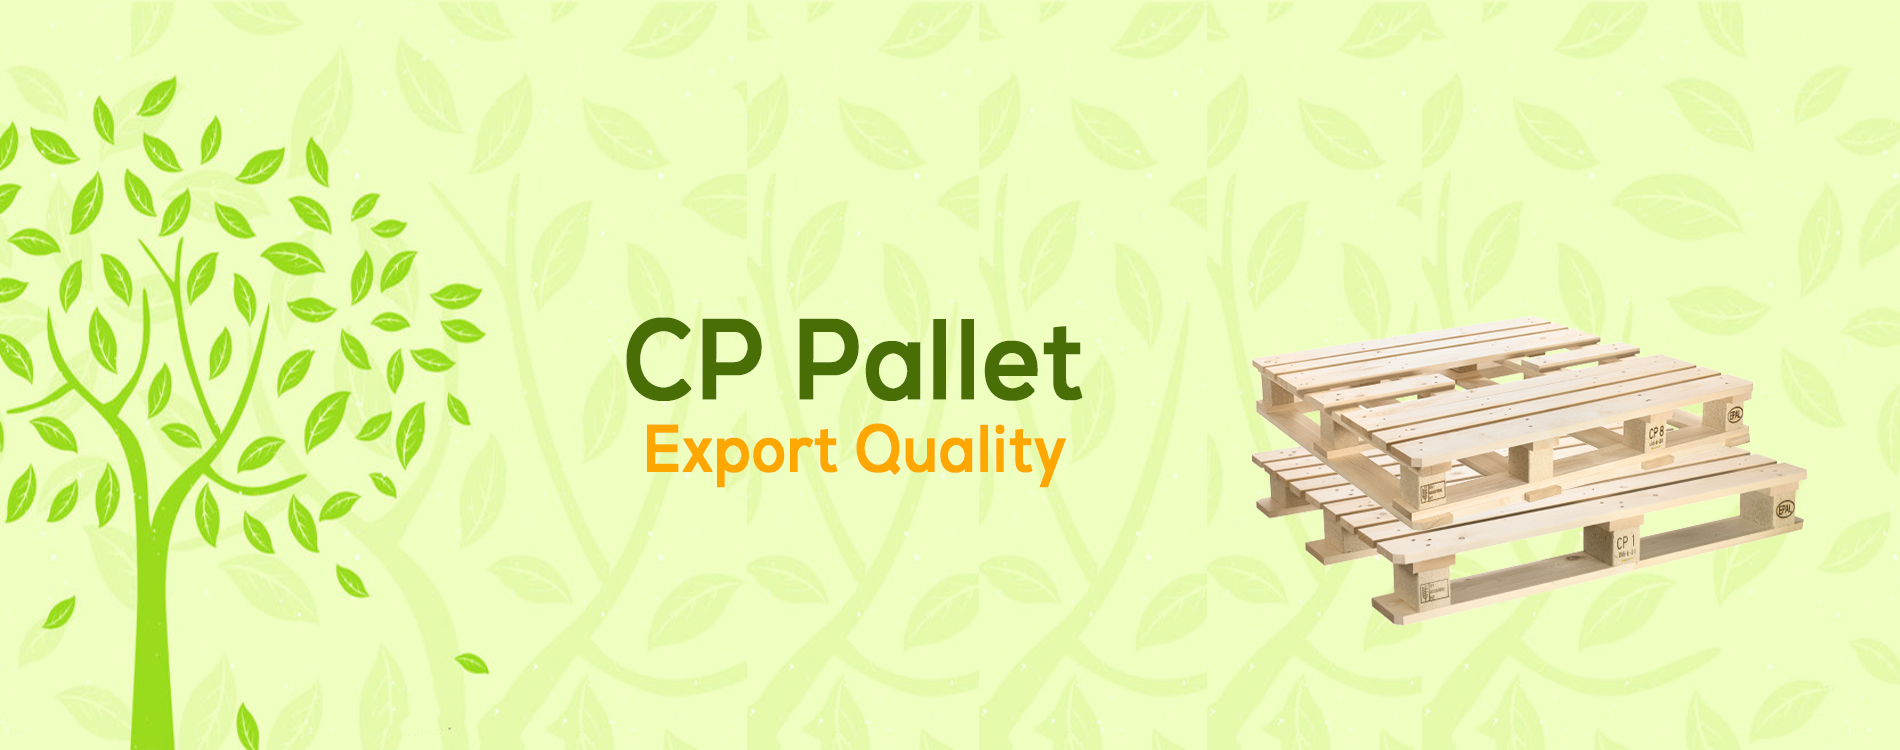 Export Quality Stock Illustrations, Cliparts and Royalty Free Export Quality  Vectors